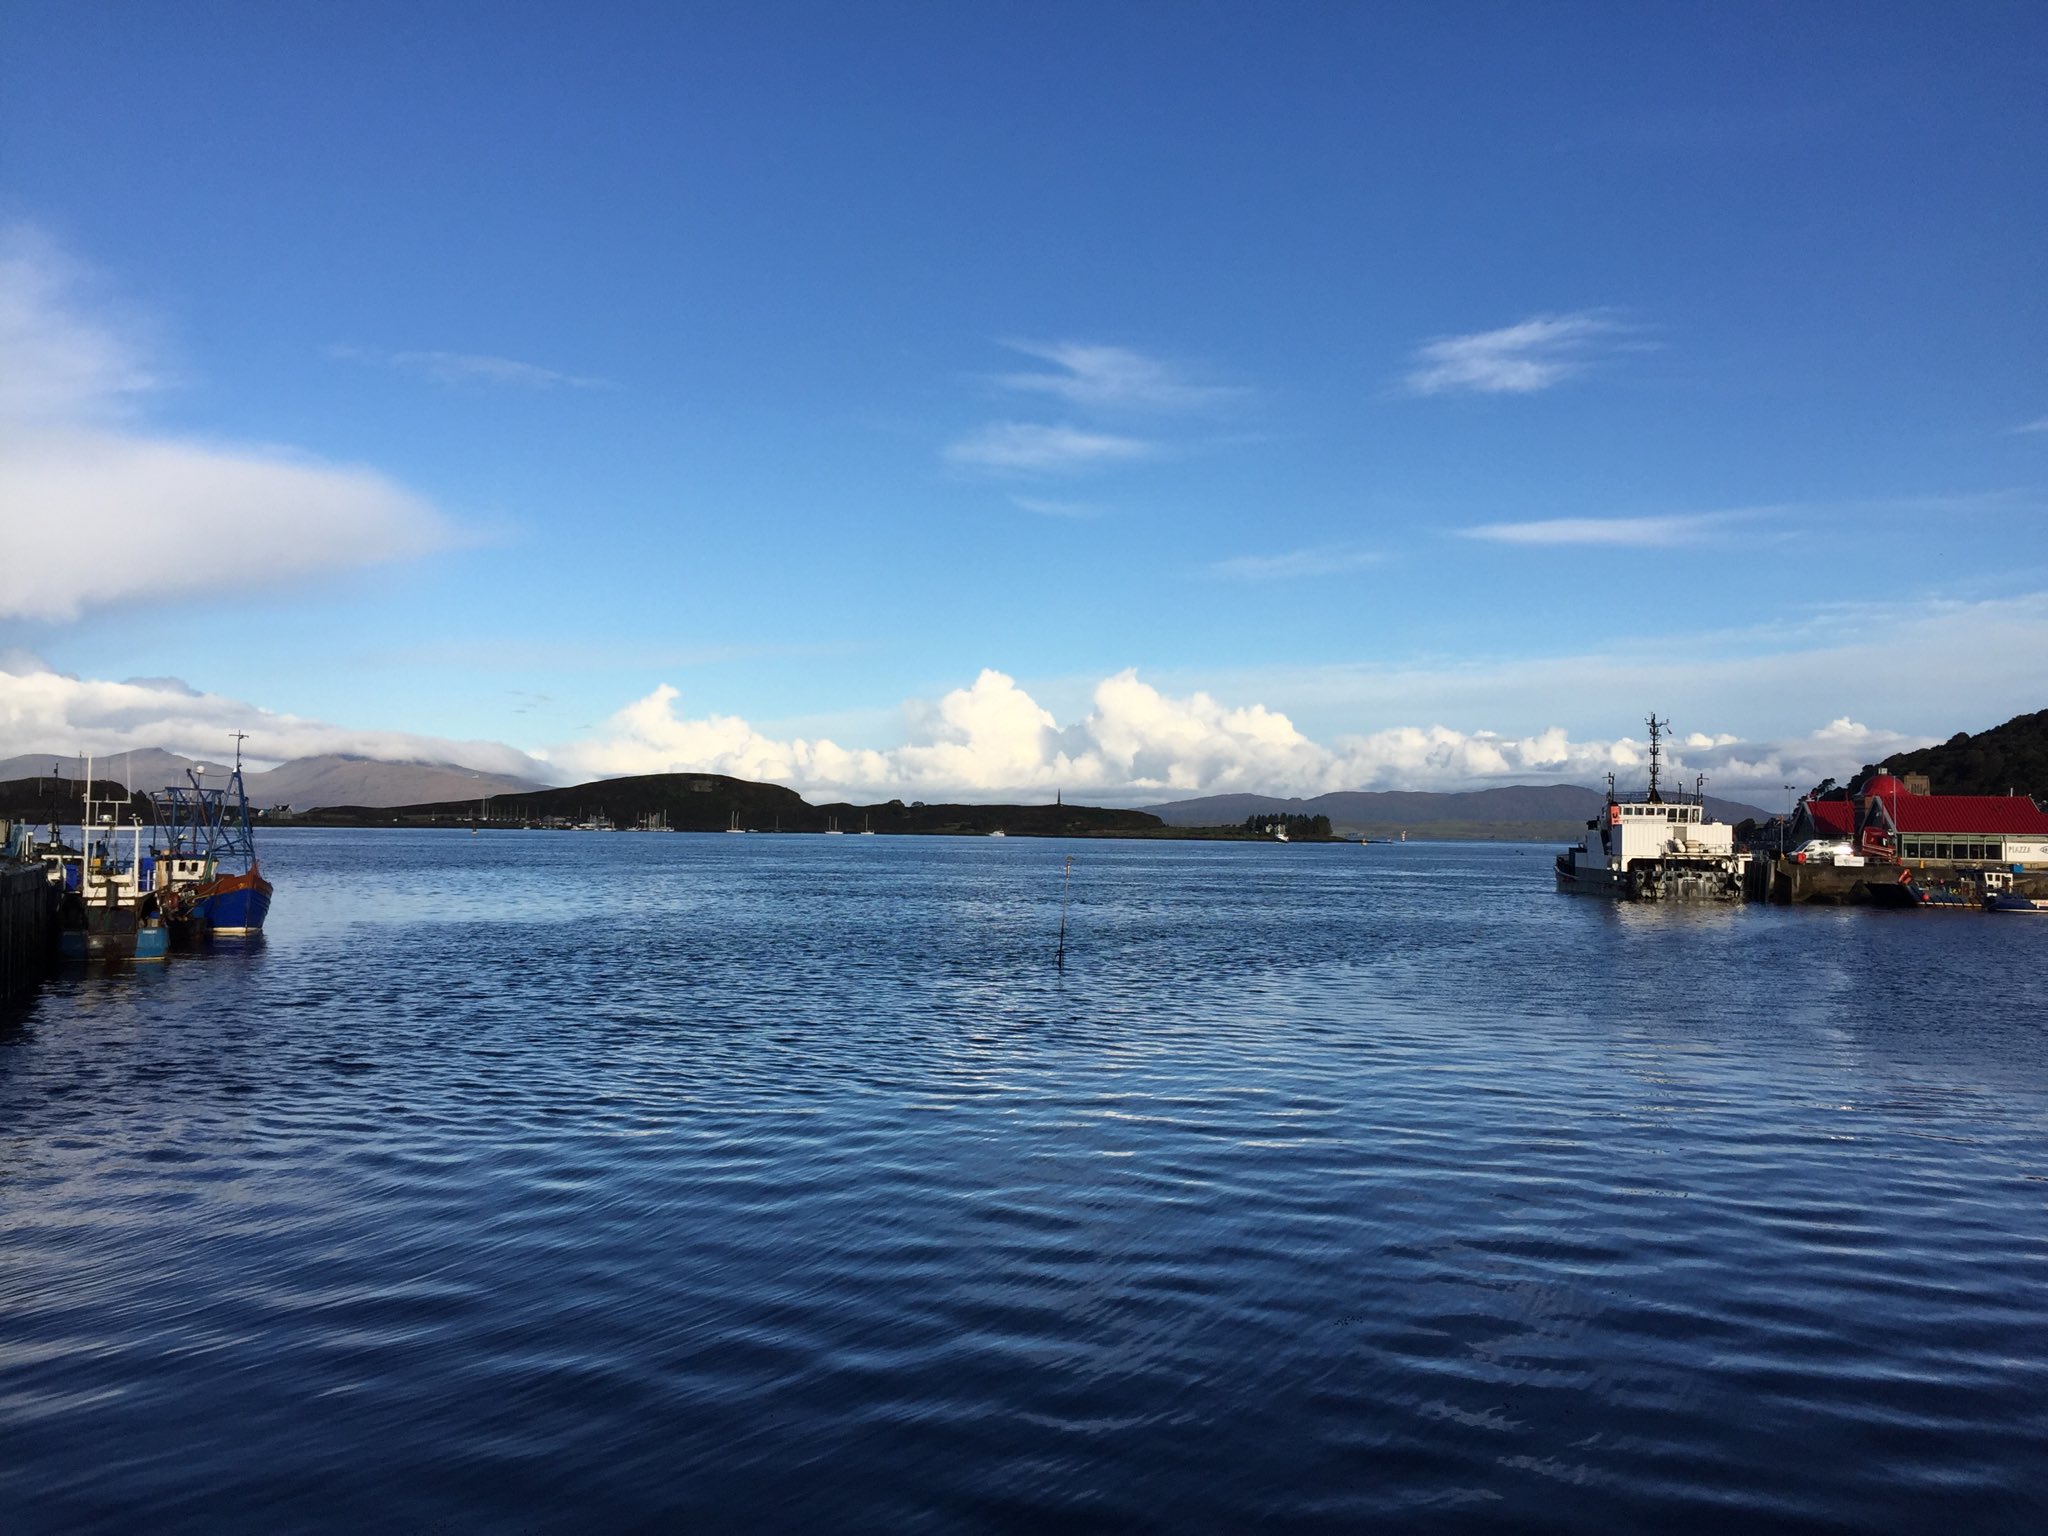 Sunny view of Oban across water - picture taken by Carol Robinson